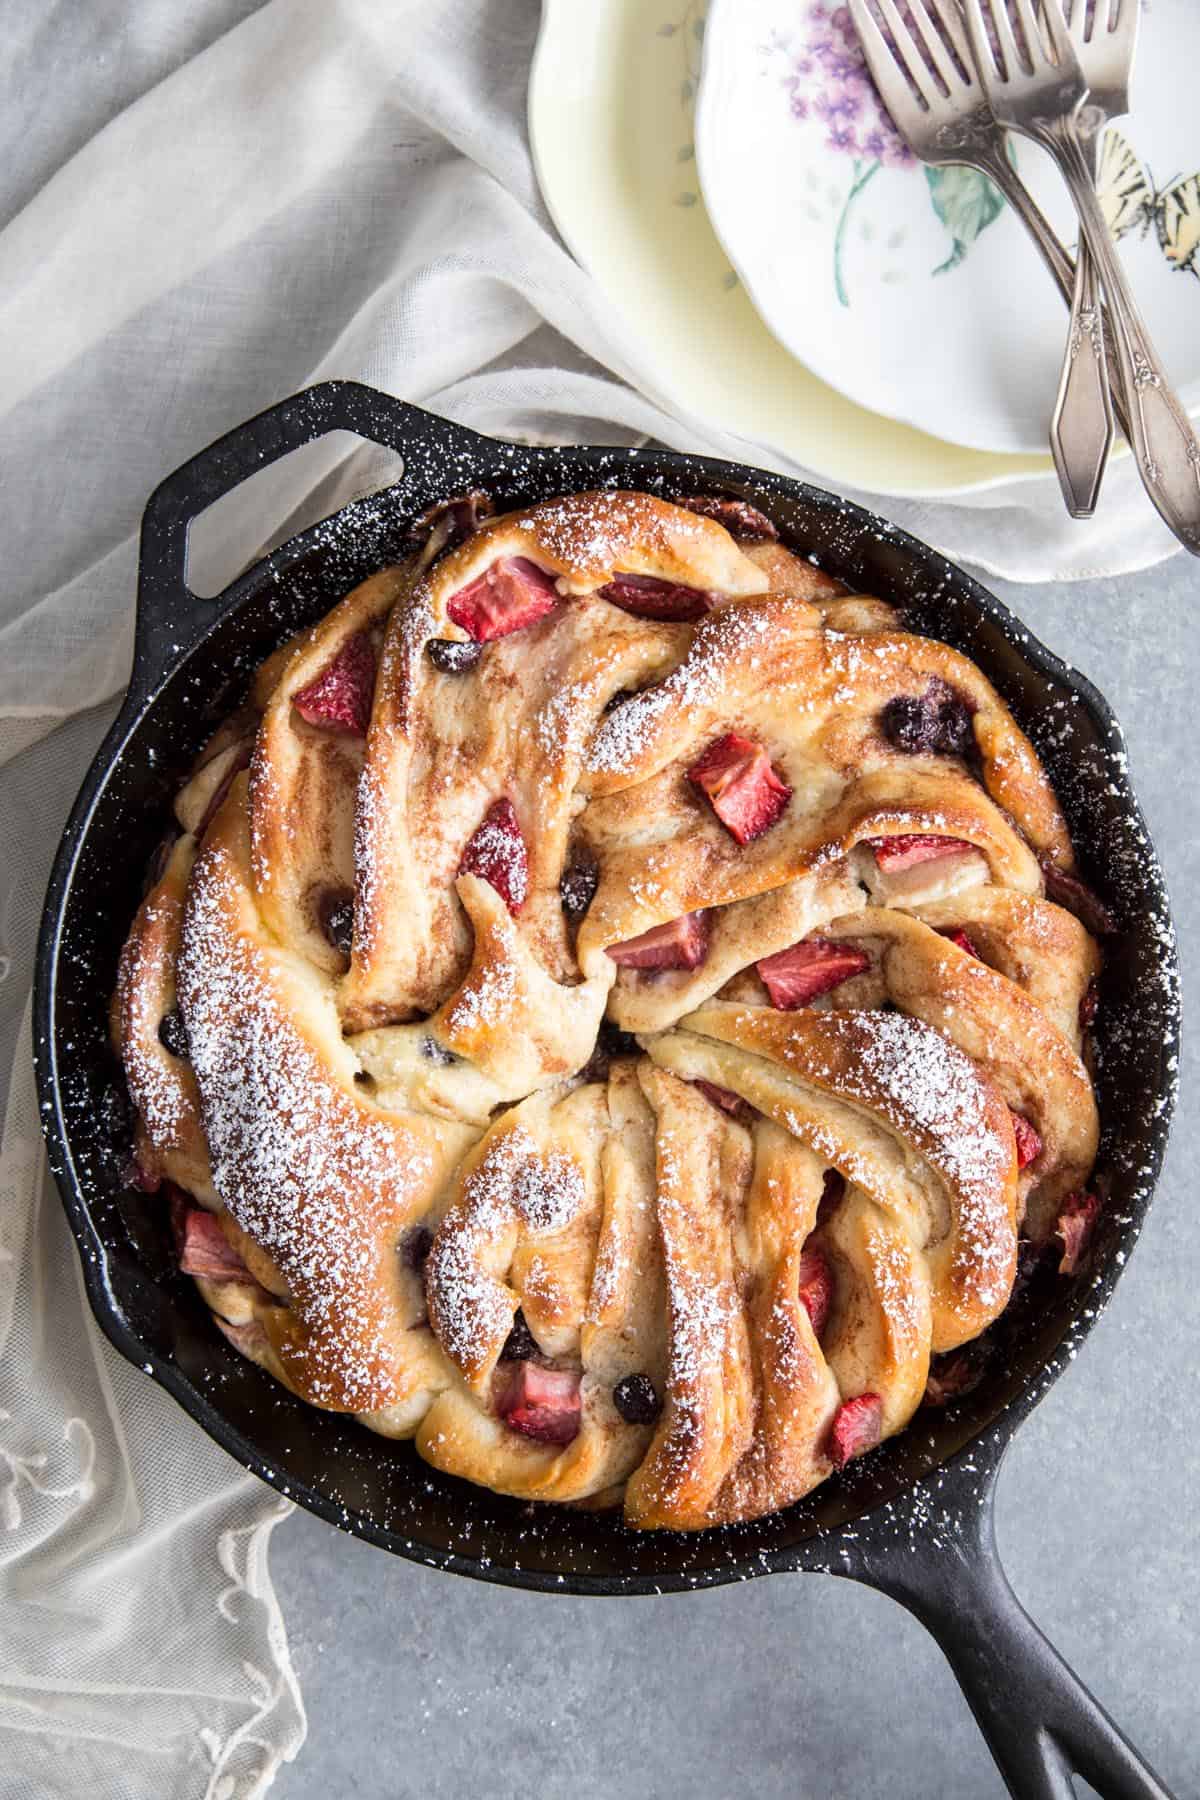 Braided cinnamon bread with berries in a cast iron pan.